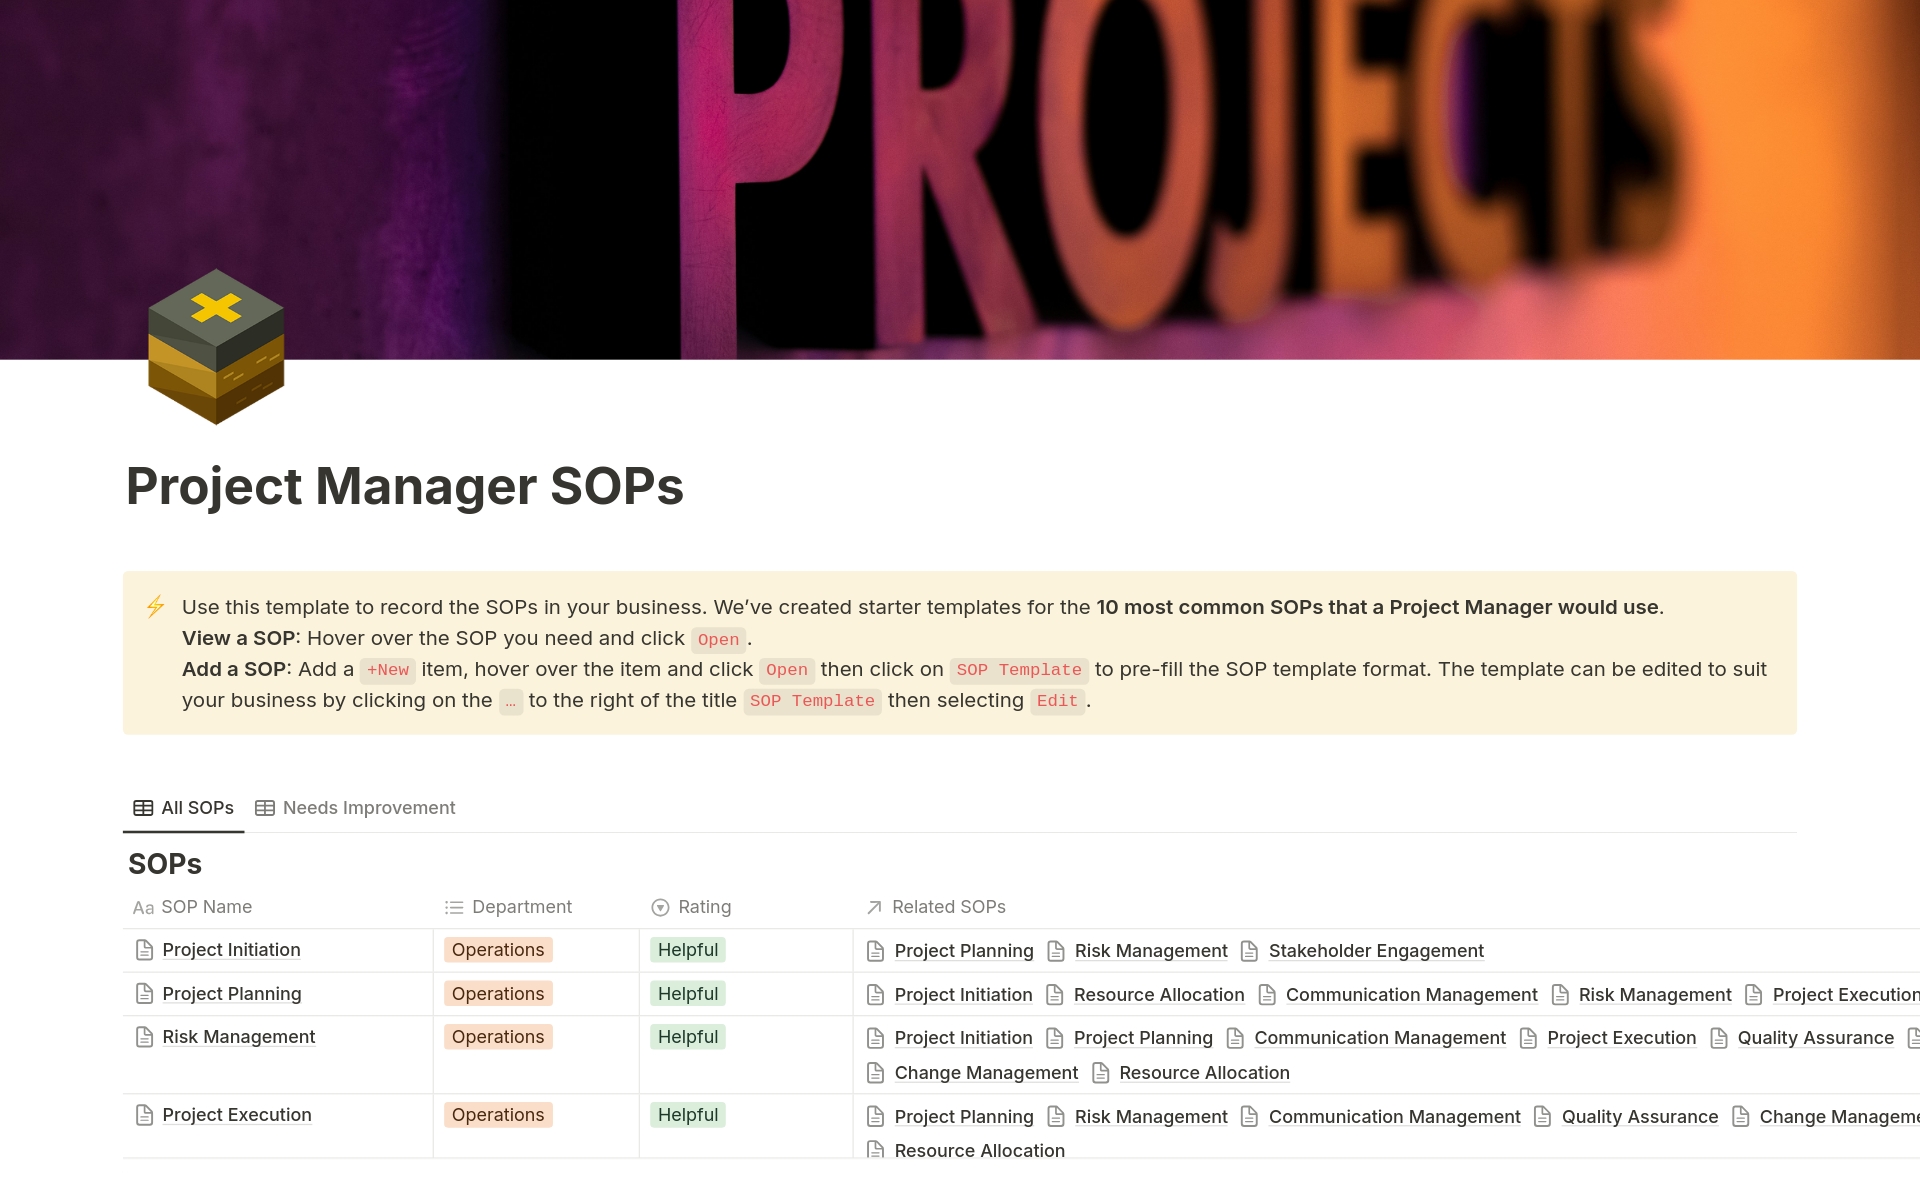 This template outlines Standard Operating Procedures (SOPs) for project management, and it outlines steps to take in each phase of a project, from initiation to closure. Includes 20+ pages of best practice SOPs to save you 10+ hours of research.